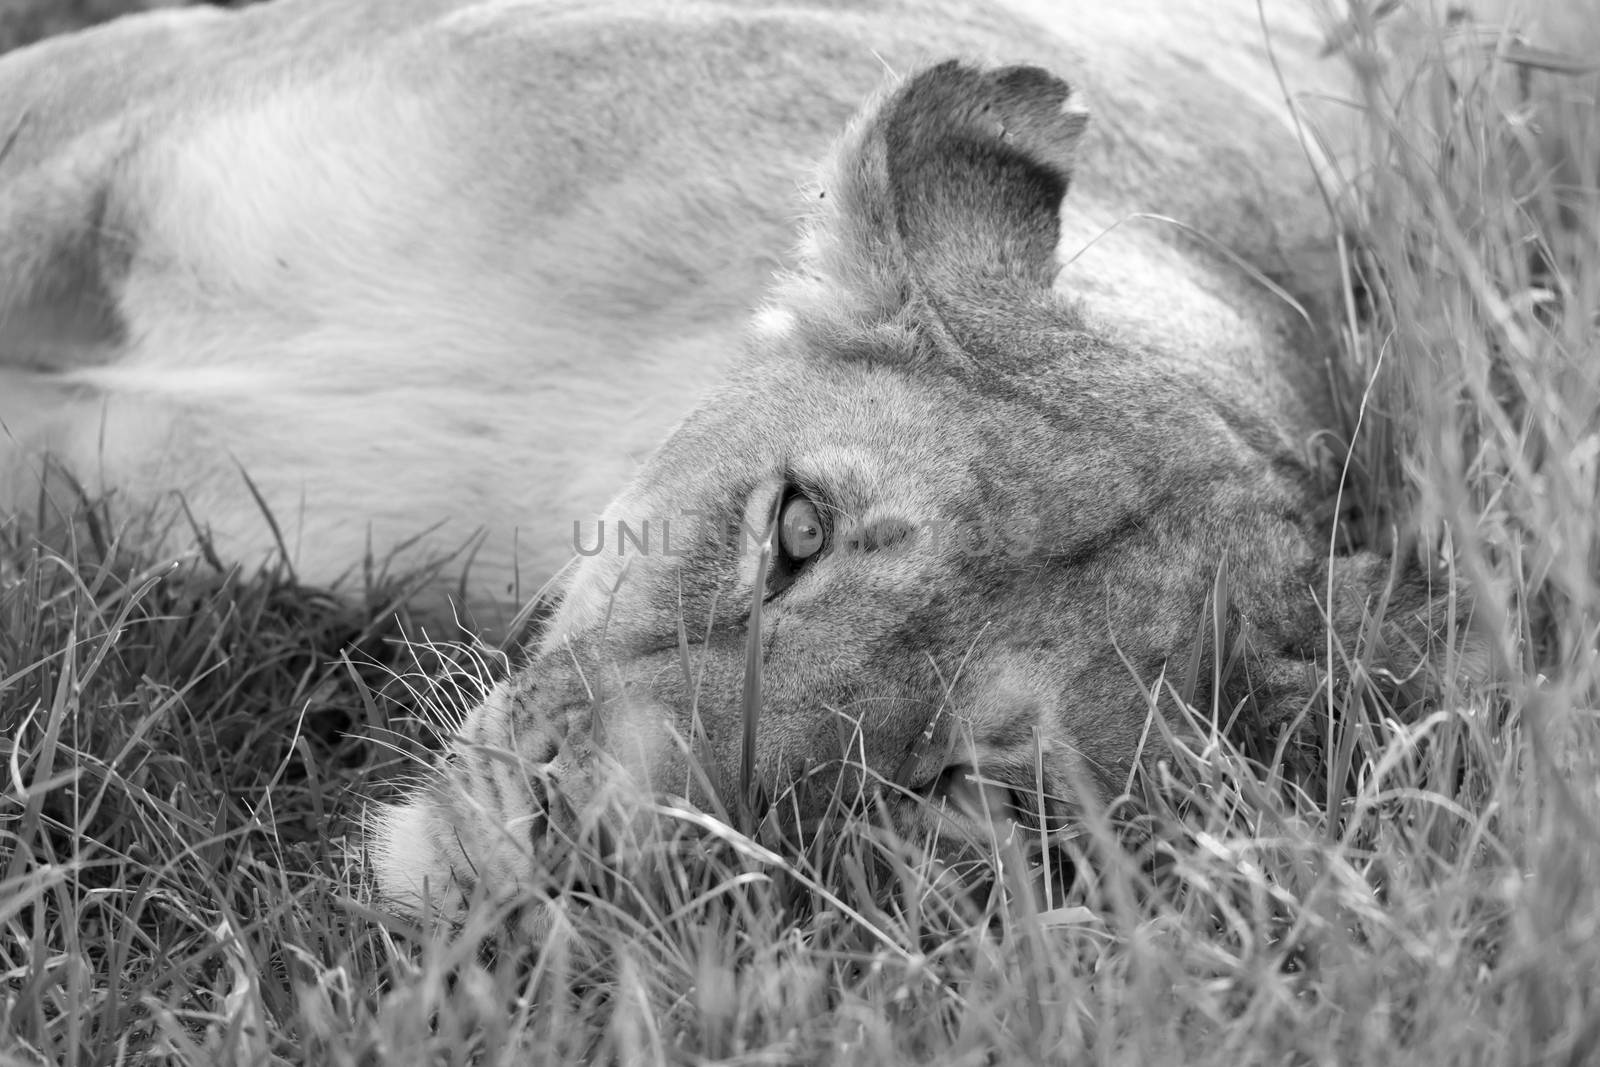 A closeup of a lioness trying to rest in the grass by 25ehaag6